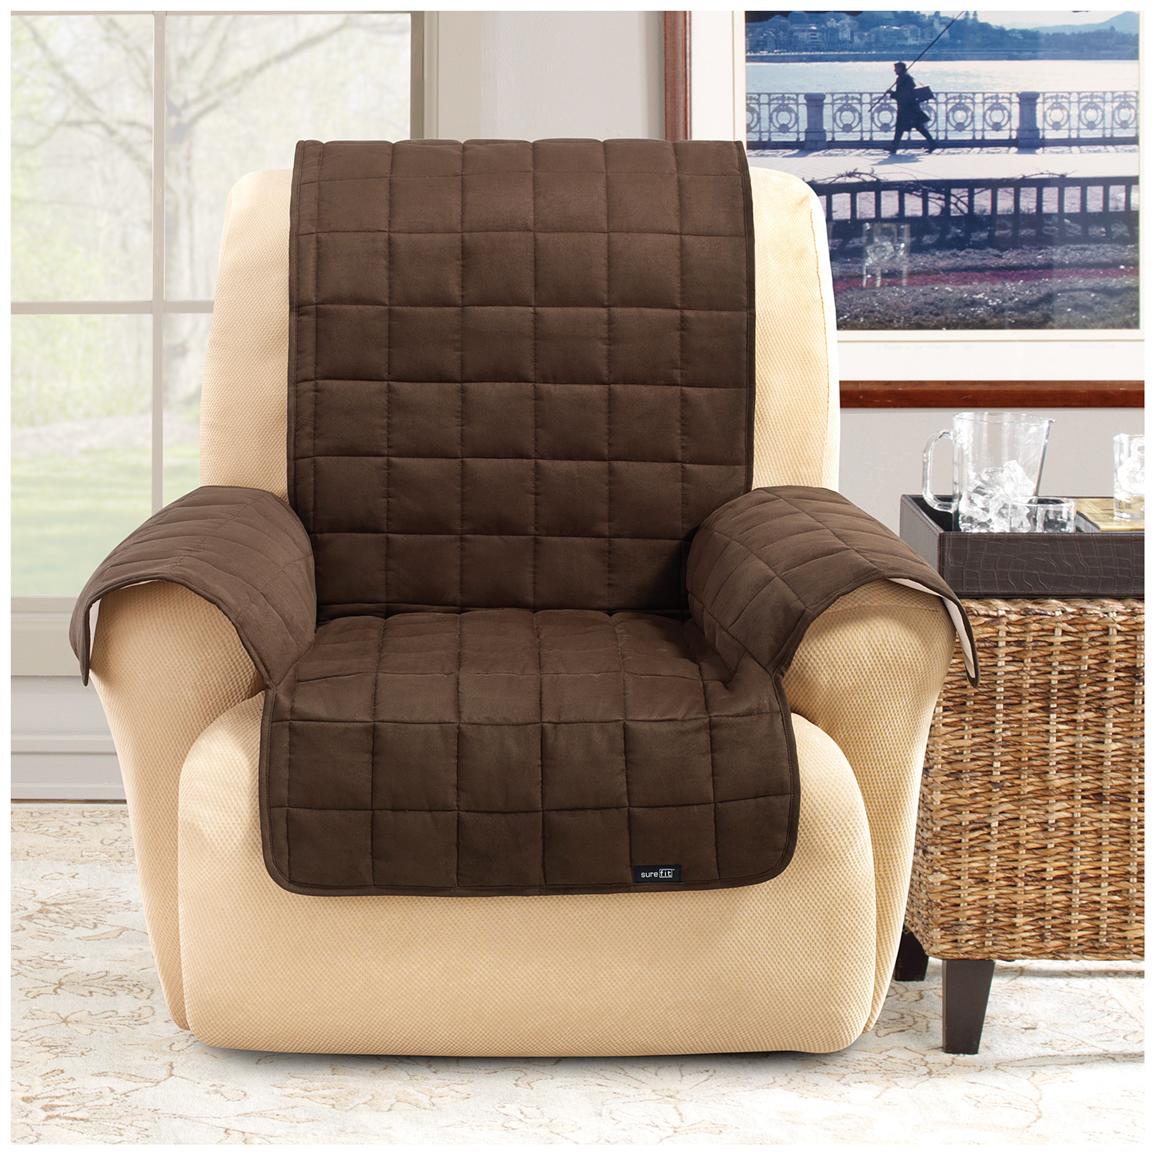  Small Recliner Chair Covers 